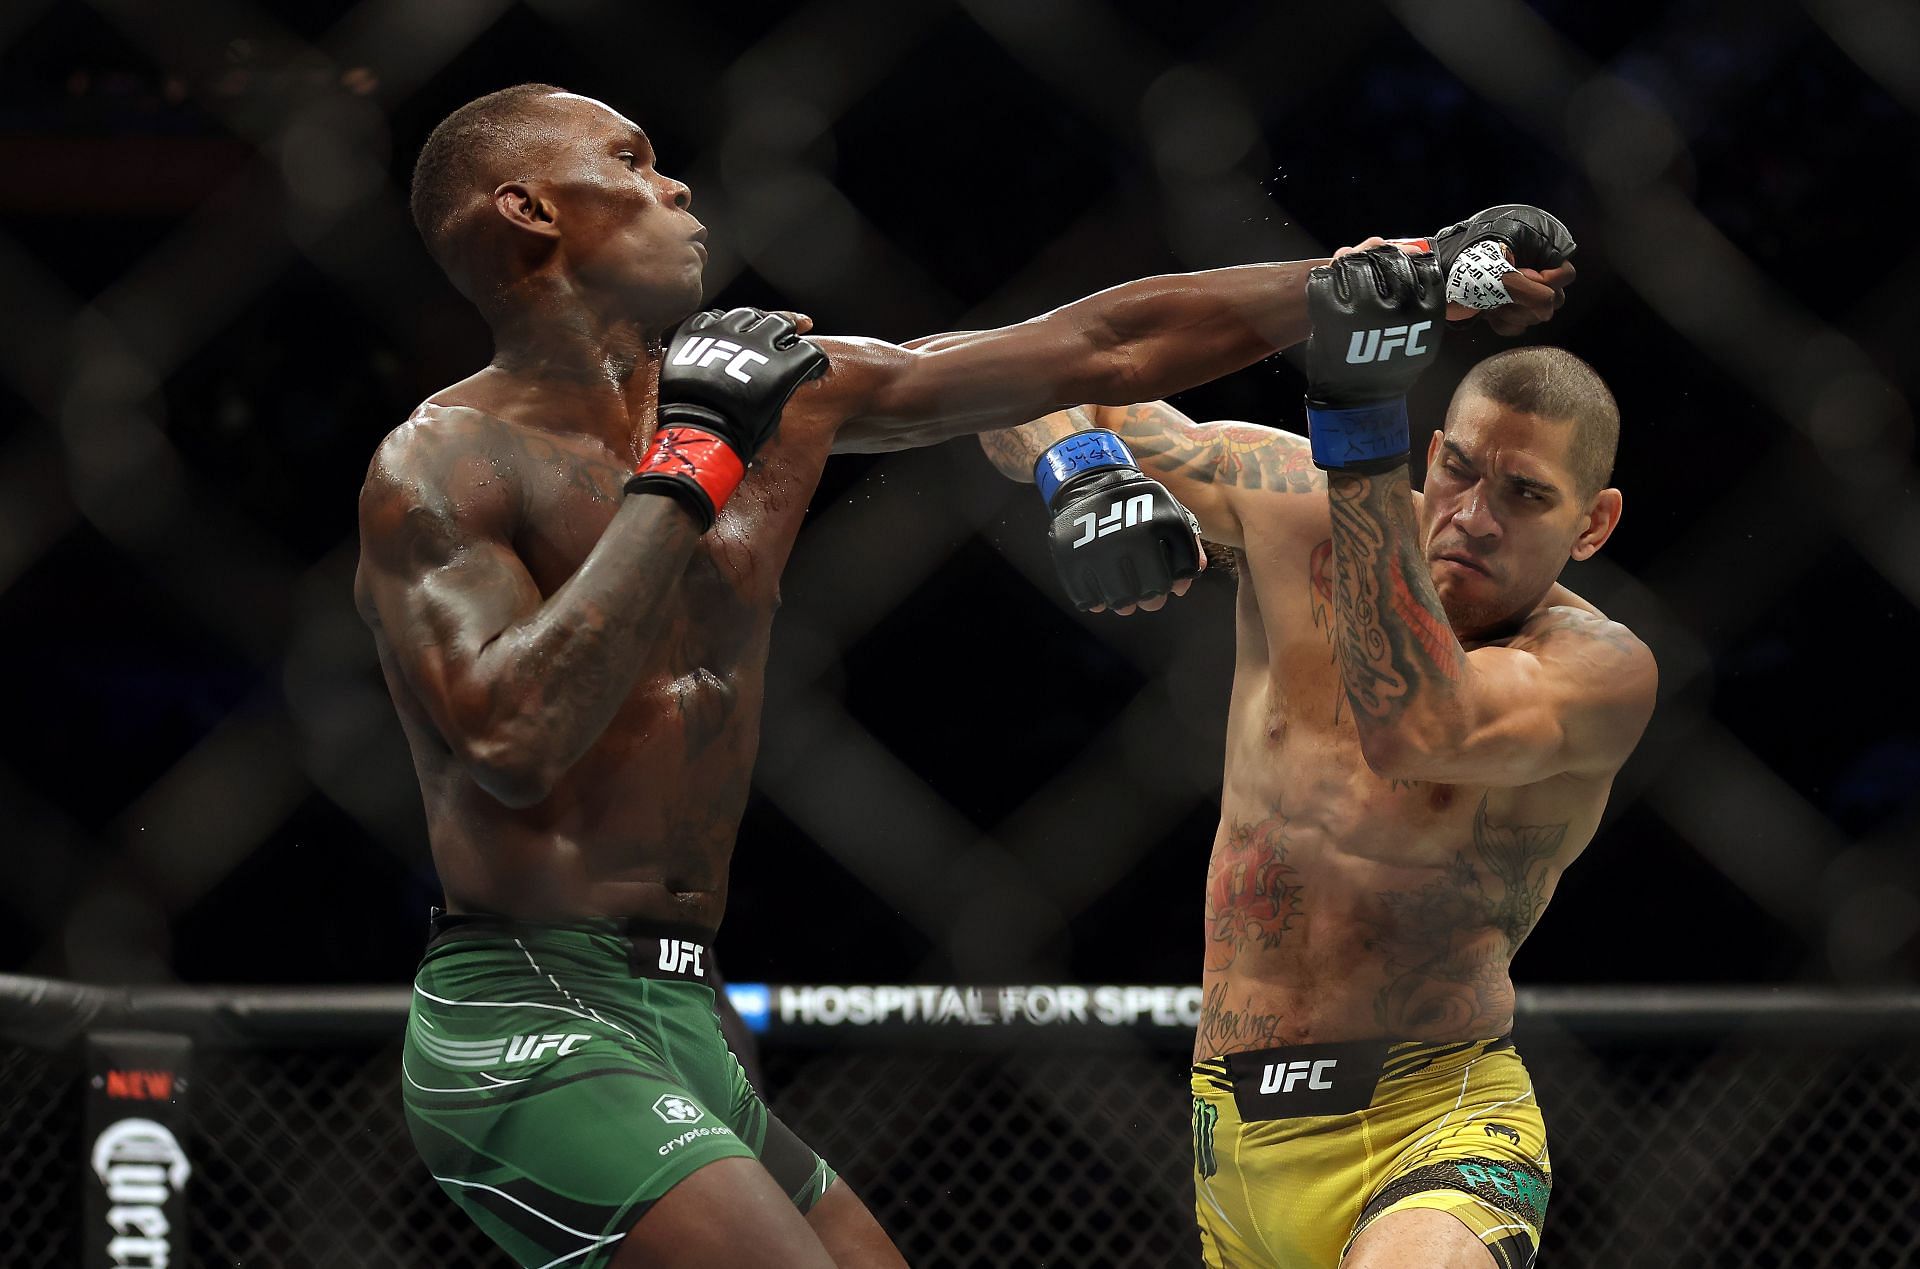 2023 will surely see a rematch between Alex Pereira and Israel Adesanya